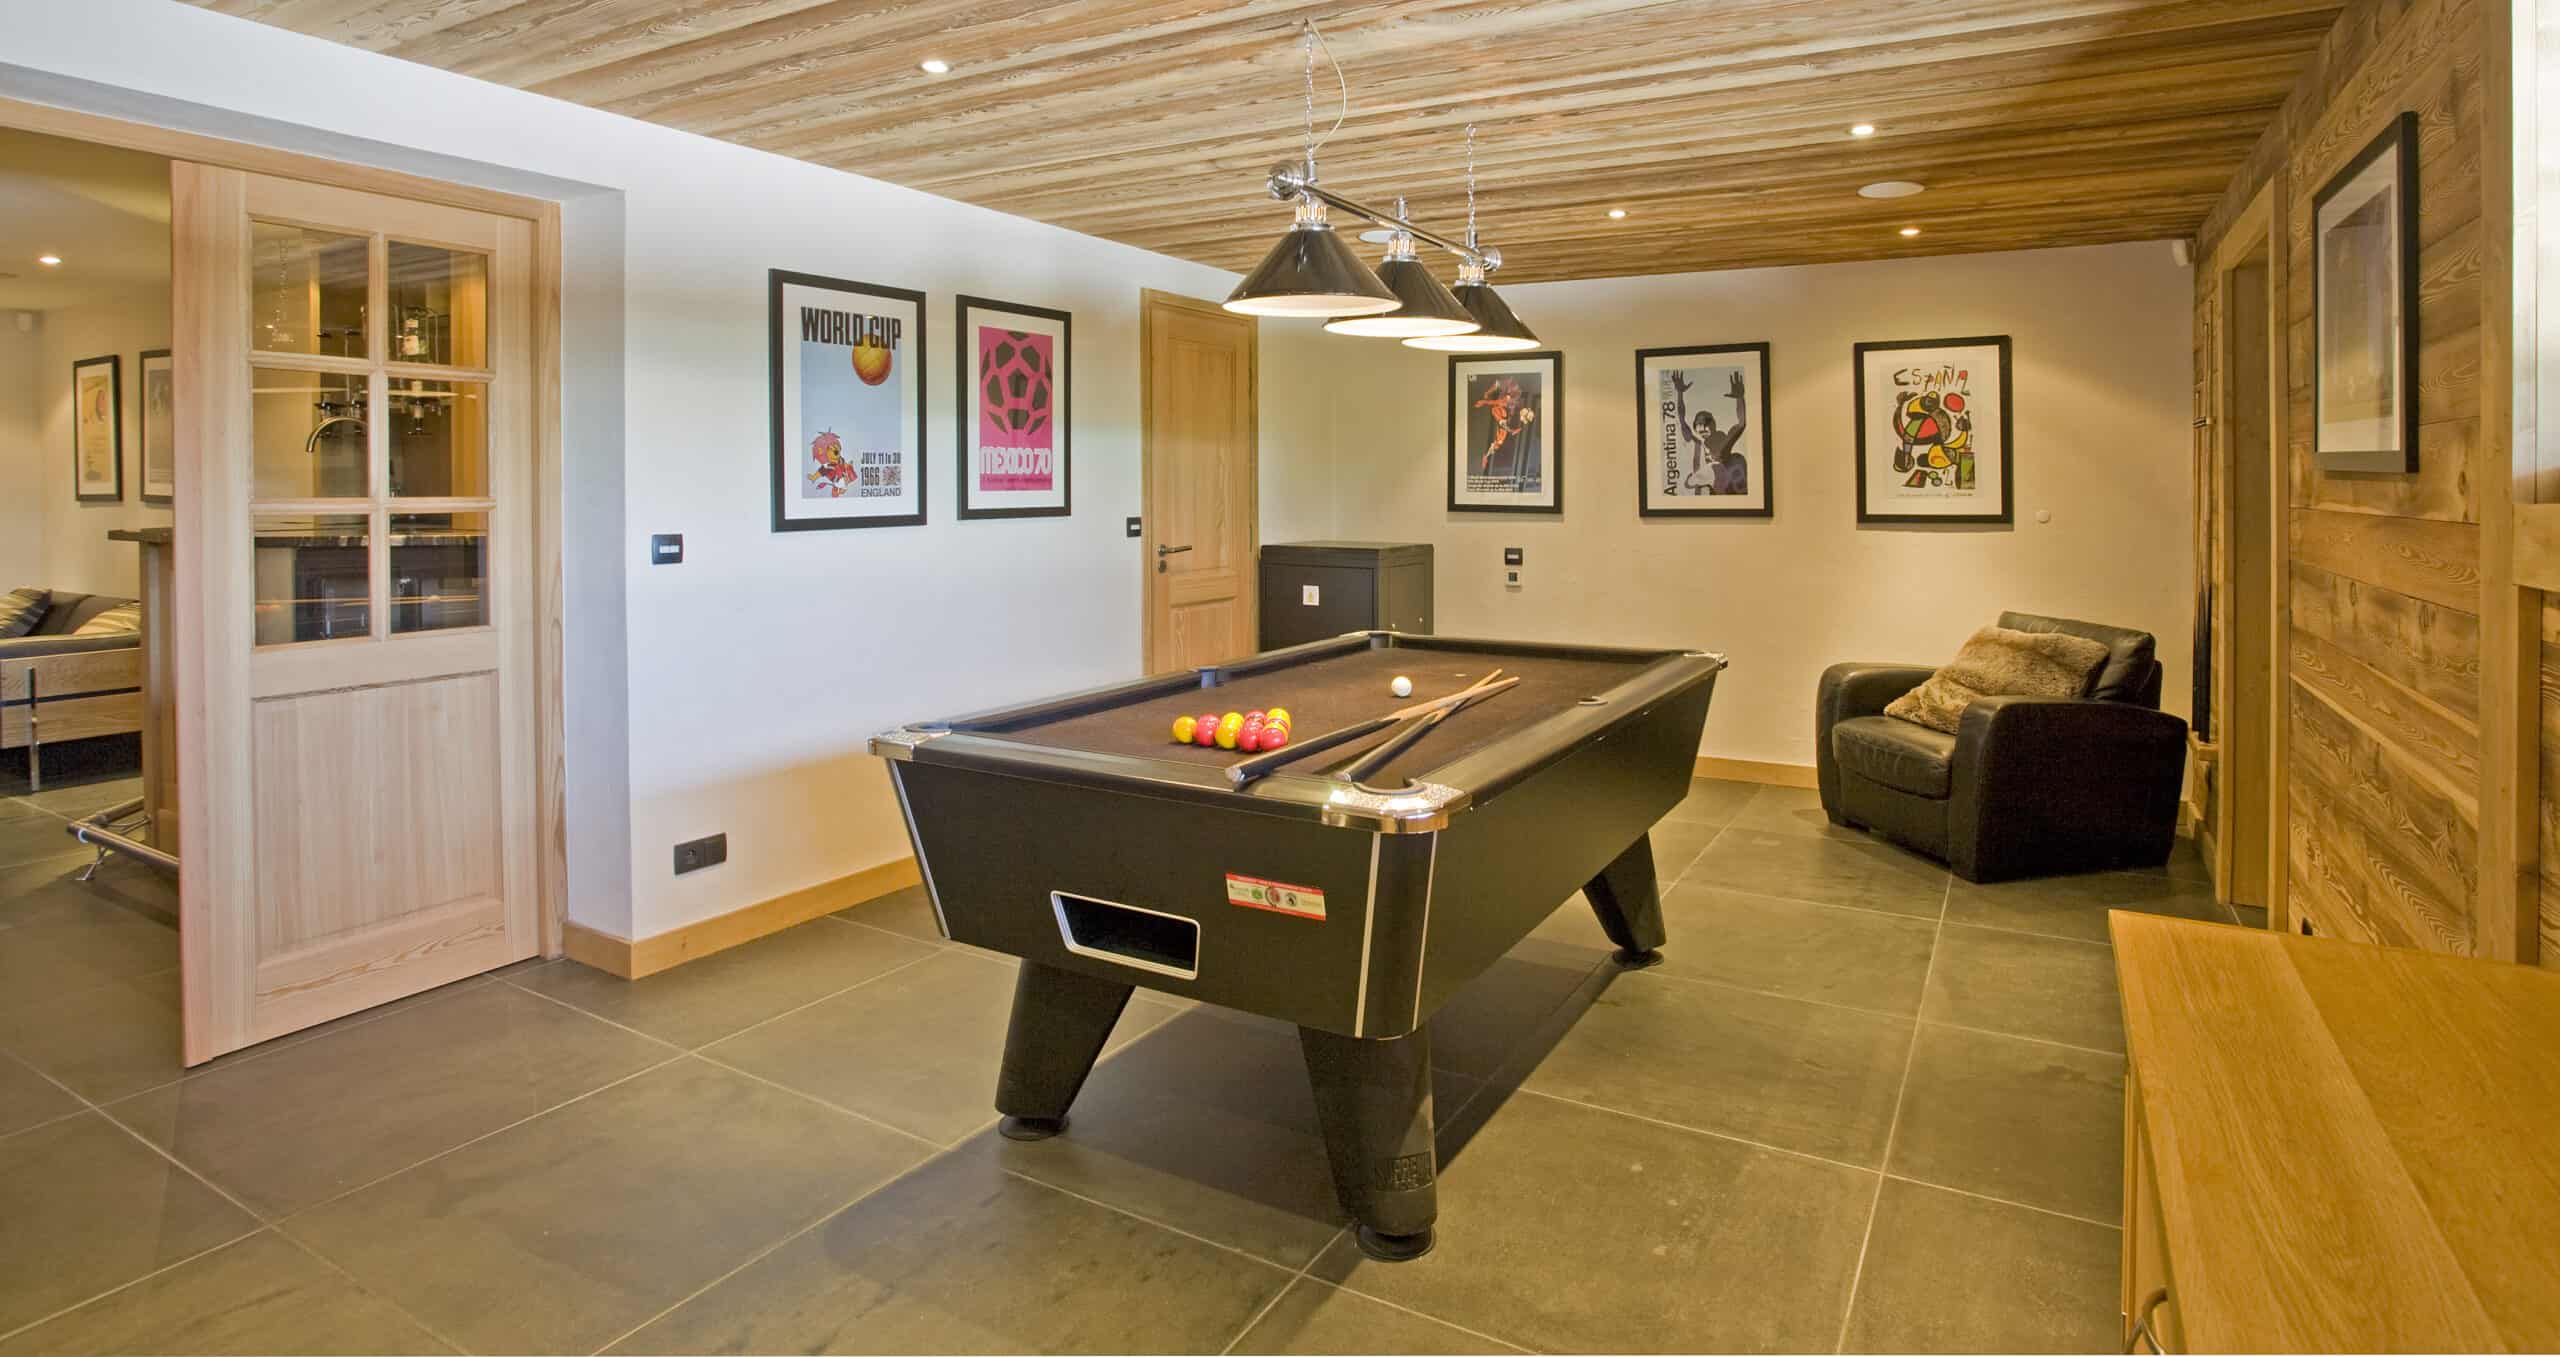 Large games room with central pool table